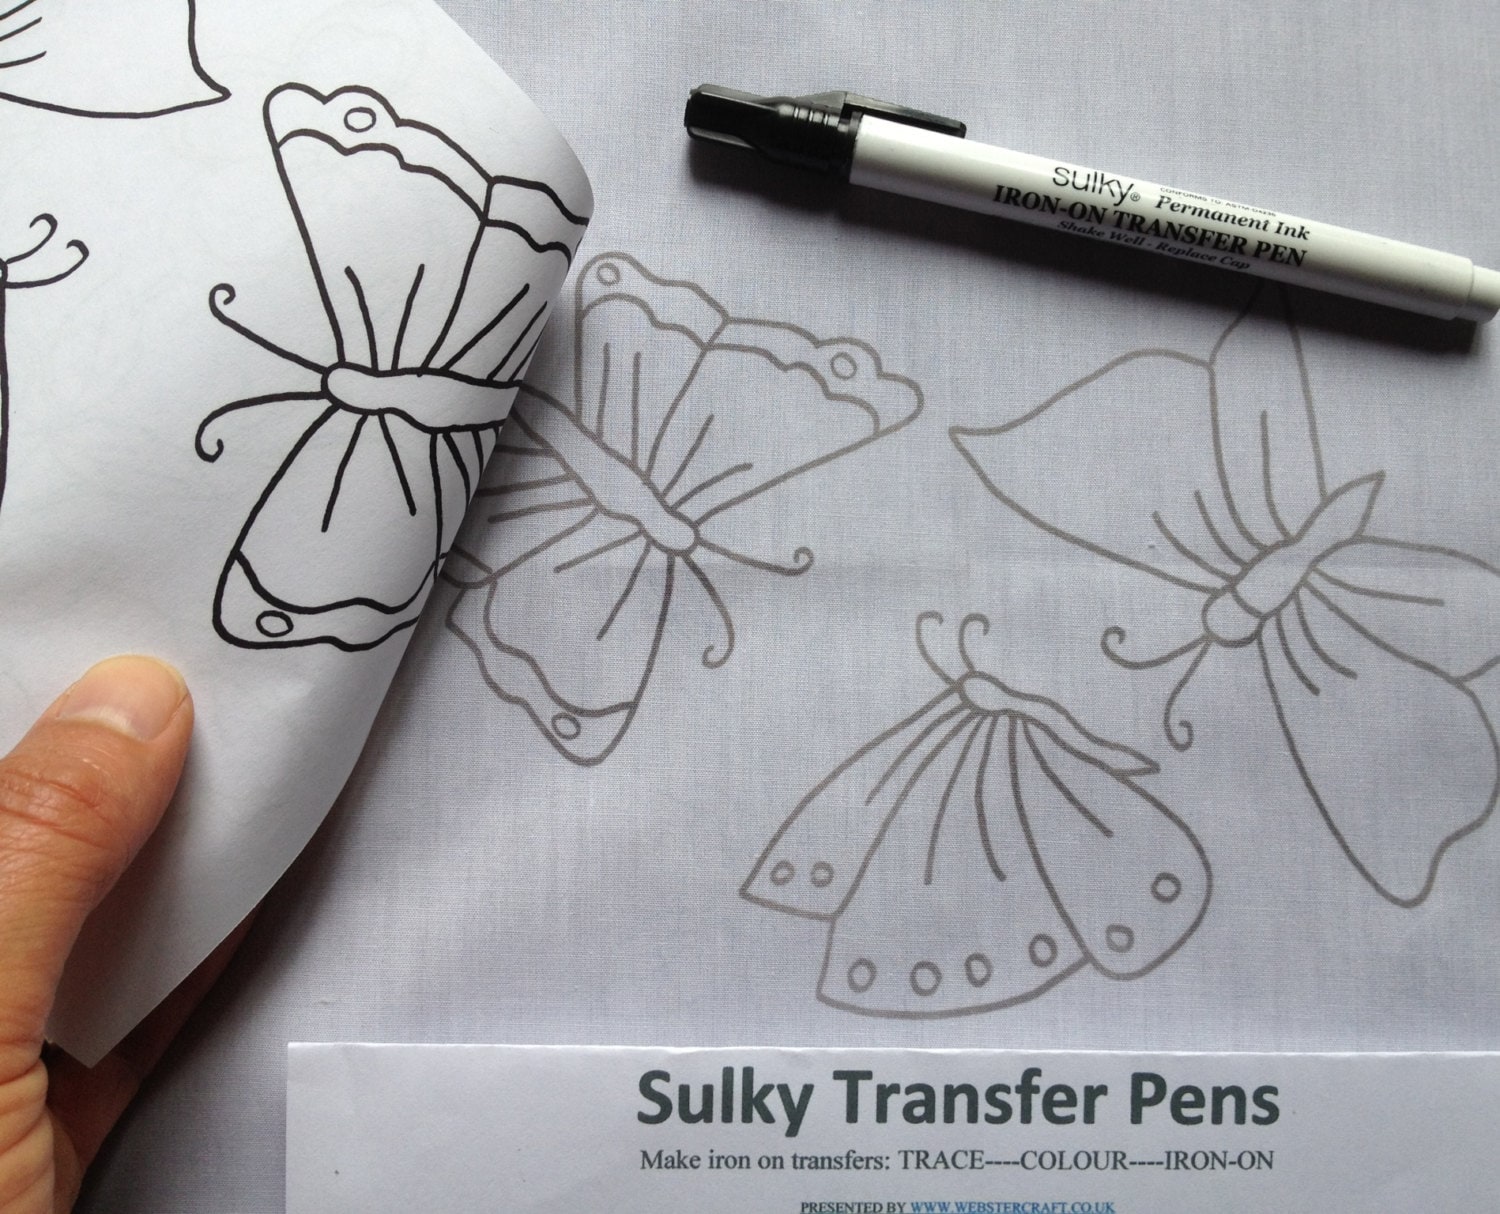 Tutorial-Embroidery Tools – The Hot Iron Transfer Pen and Pencil